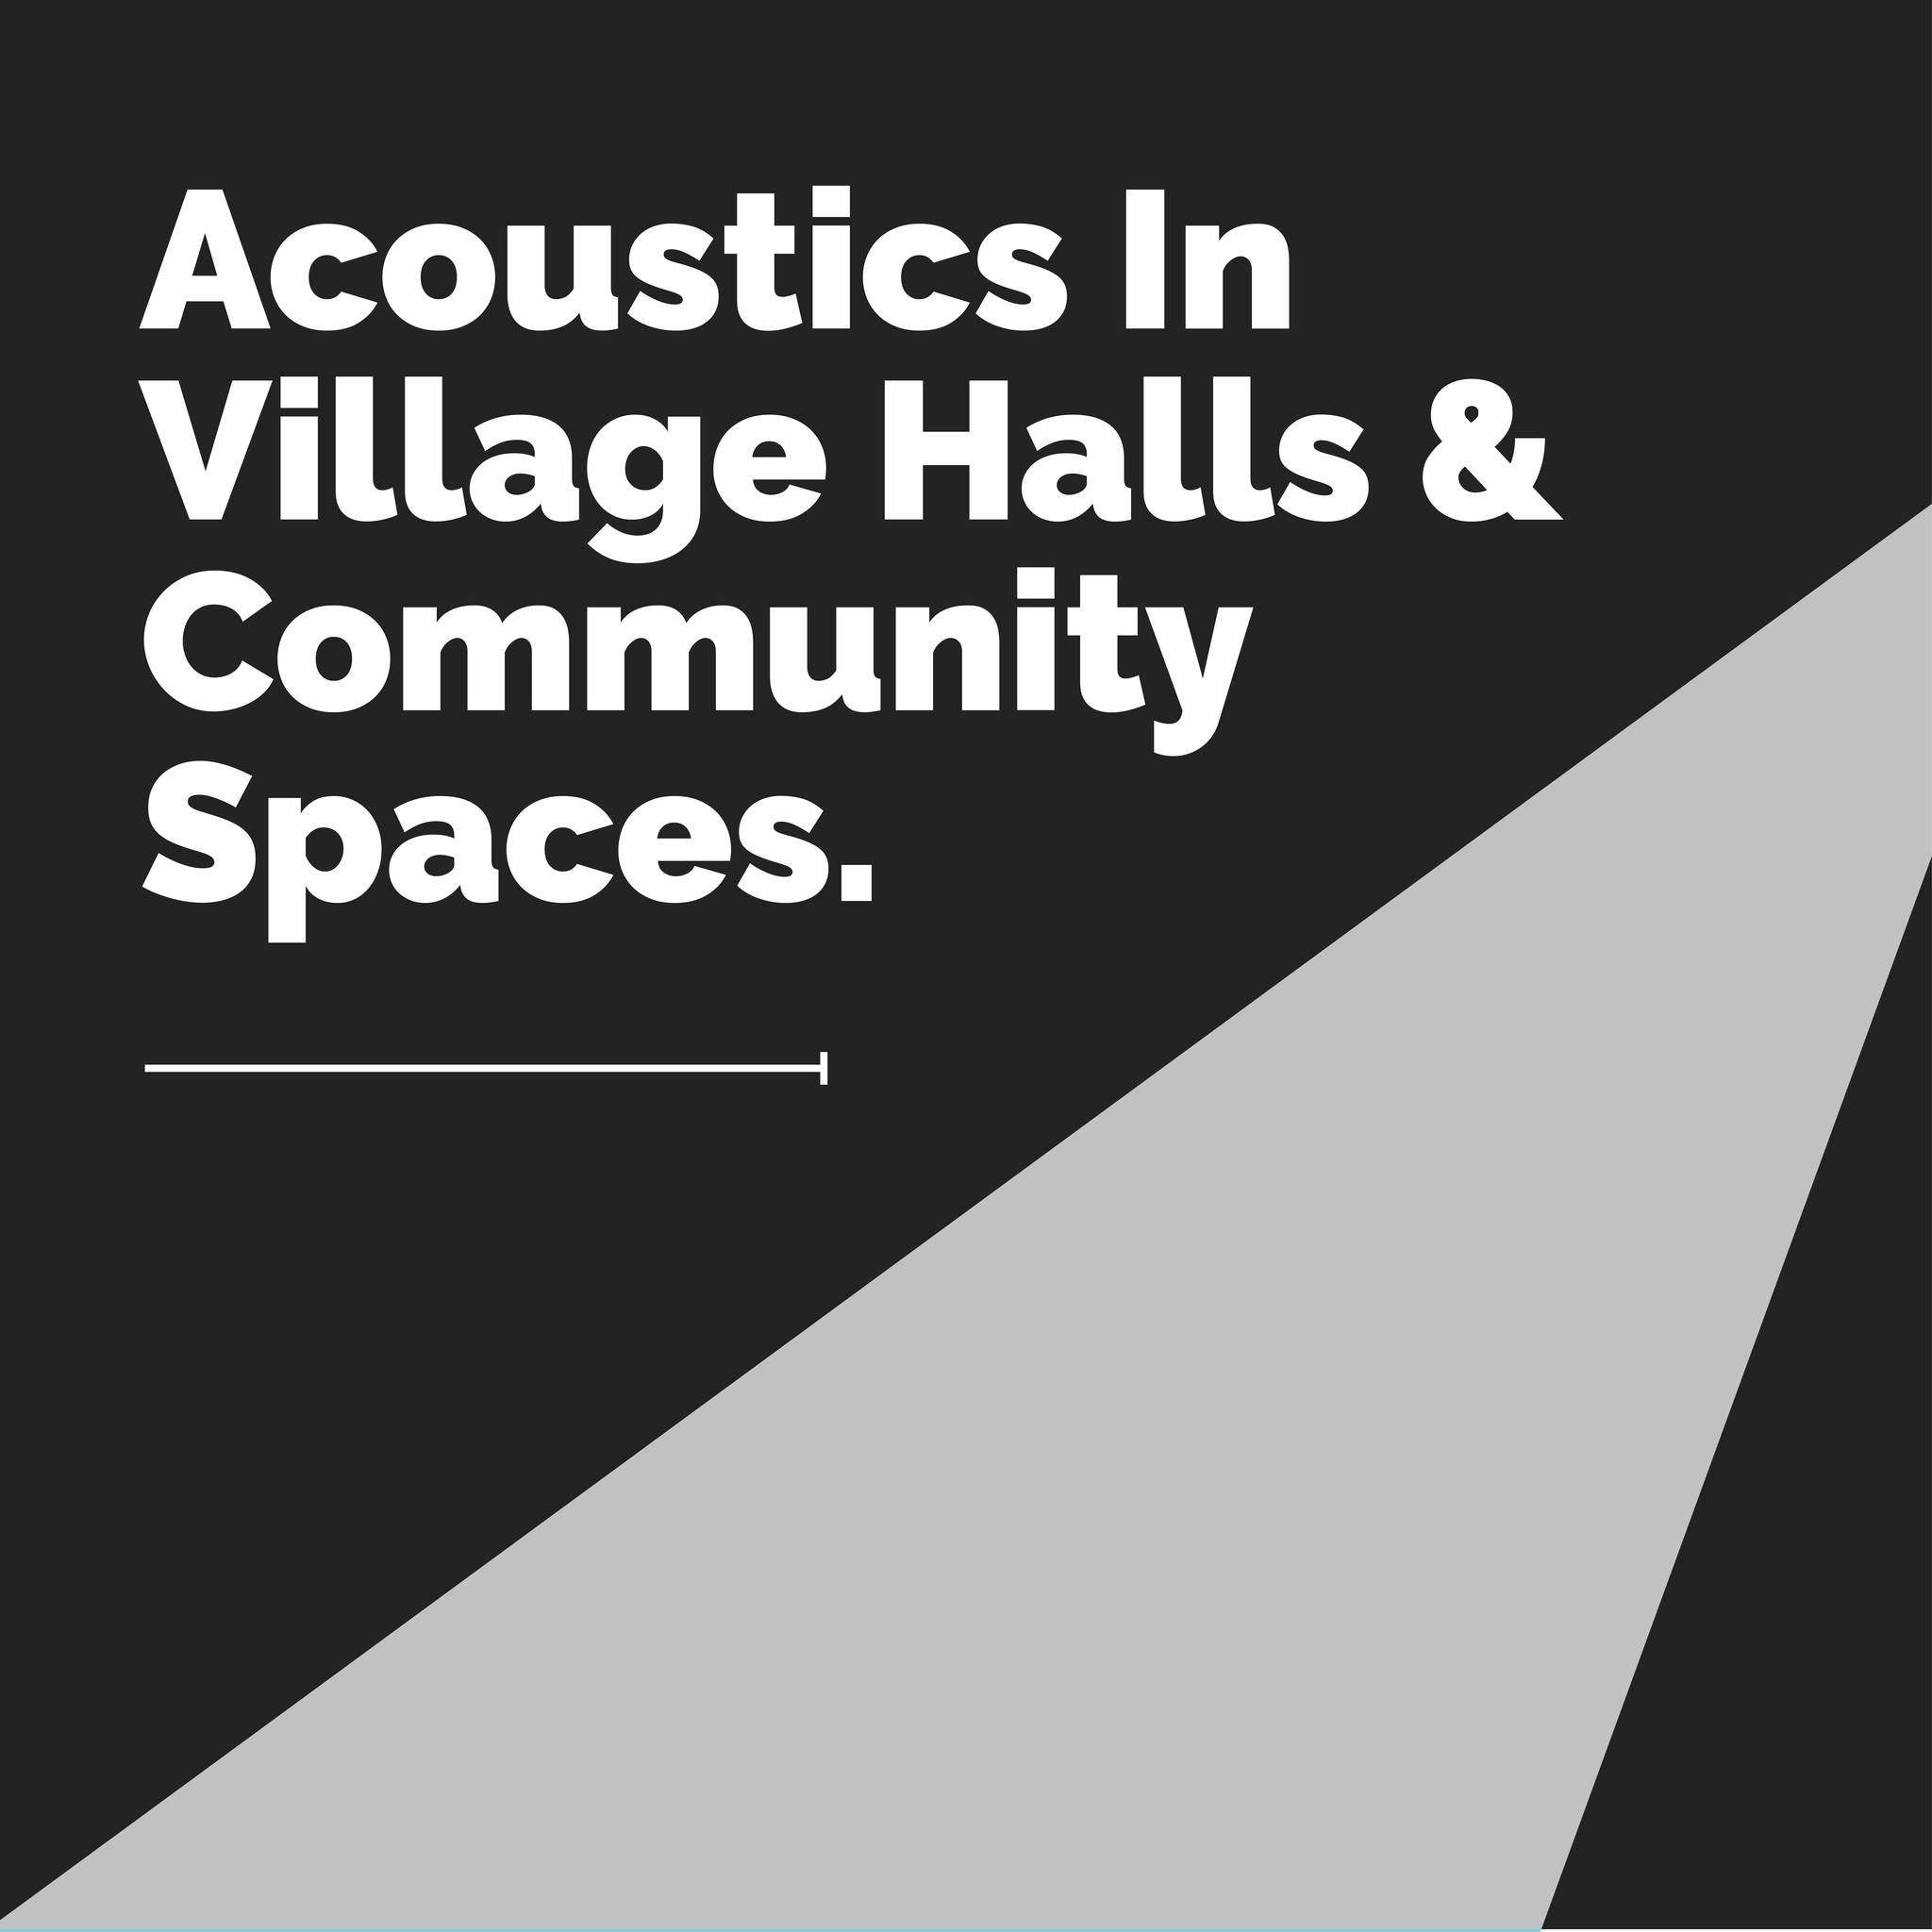 Village halls commonly face acoustic challenges due to their 
multi-purpose nature and architectural design. The expansive, open layouts and predominantly hard surfaces contribute to excessive reverberation and echo, making it difficult for speakers 